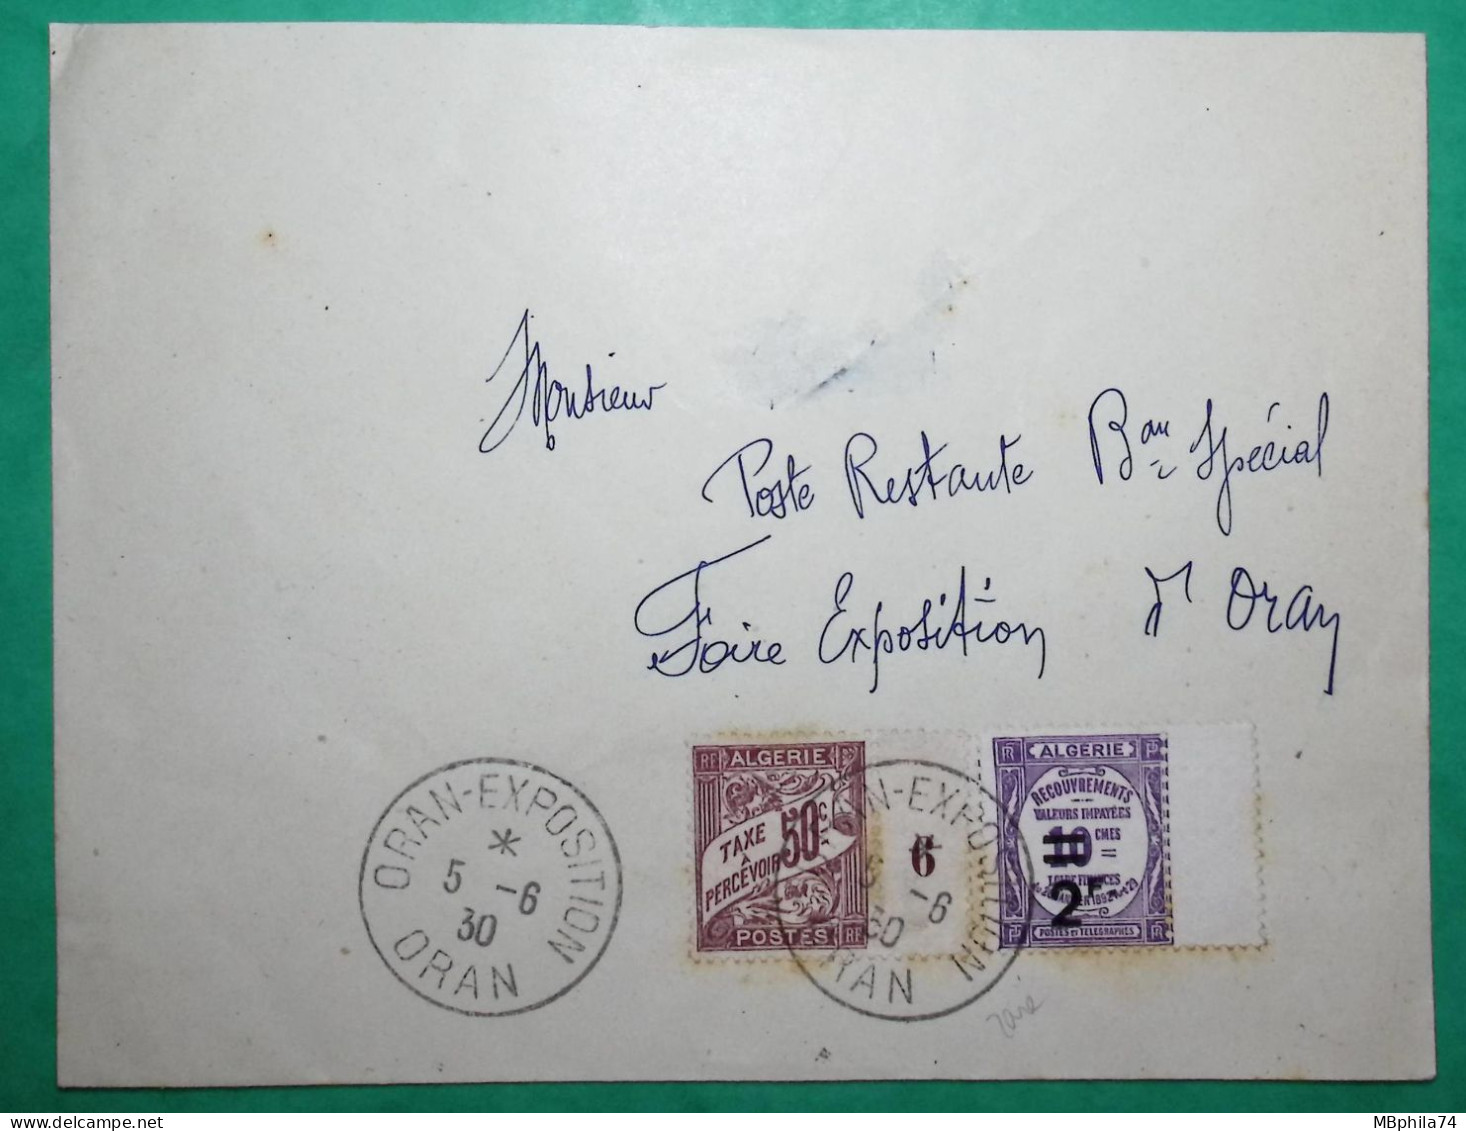 TIMBRES TAXES 50C DUVAL ALGERIE MILLESIME 6 + TAXE RECOUVREMENT SURCHARGE 2F ORAN EXPOSITION 1930 COVER FRANCE - Segnatasse